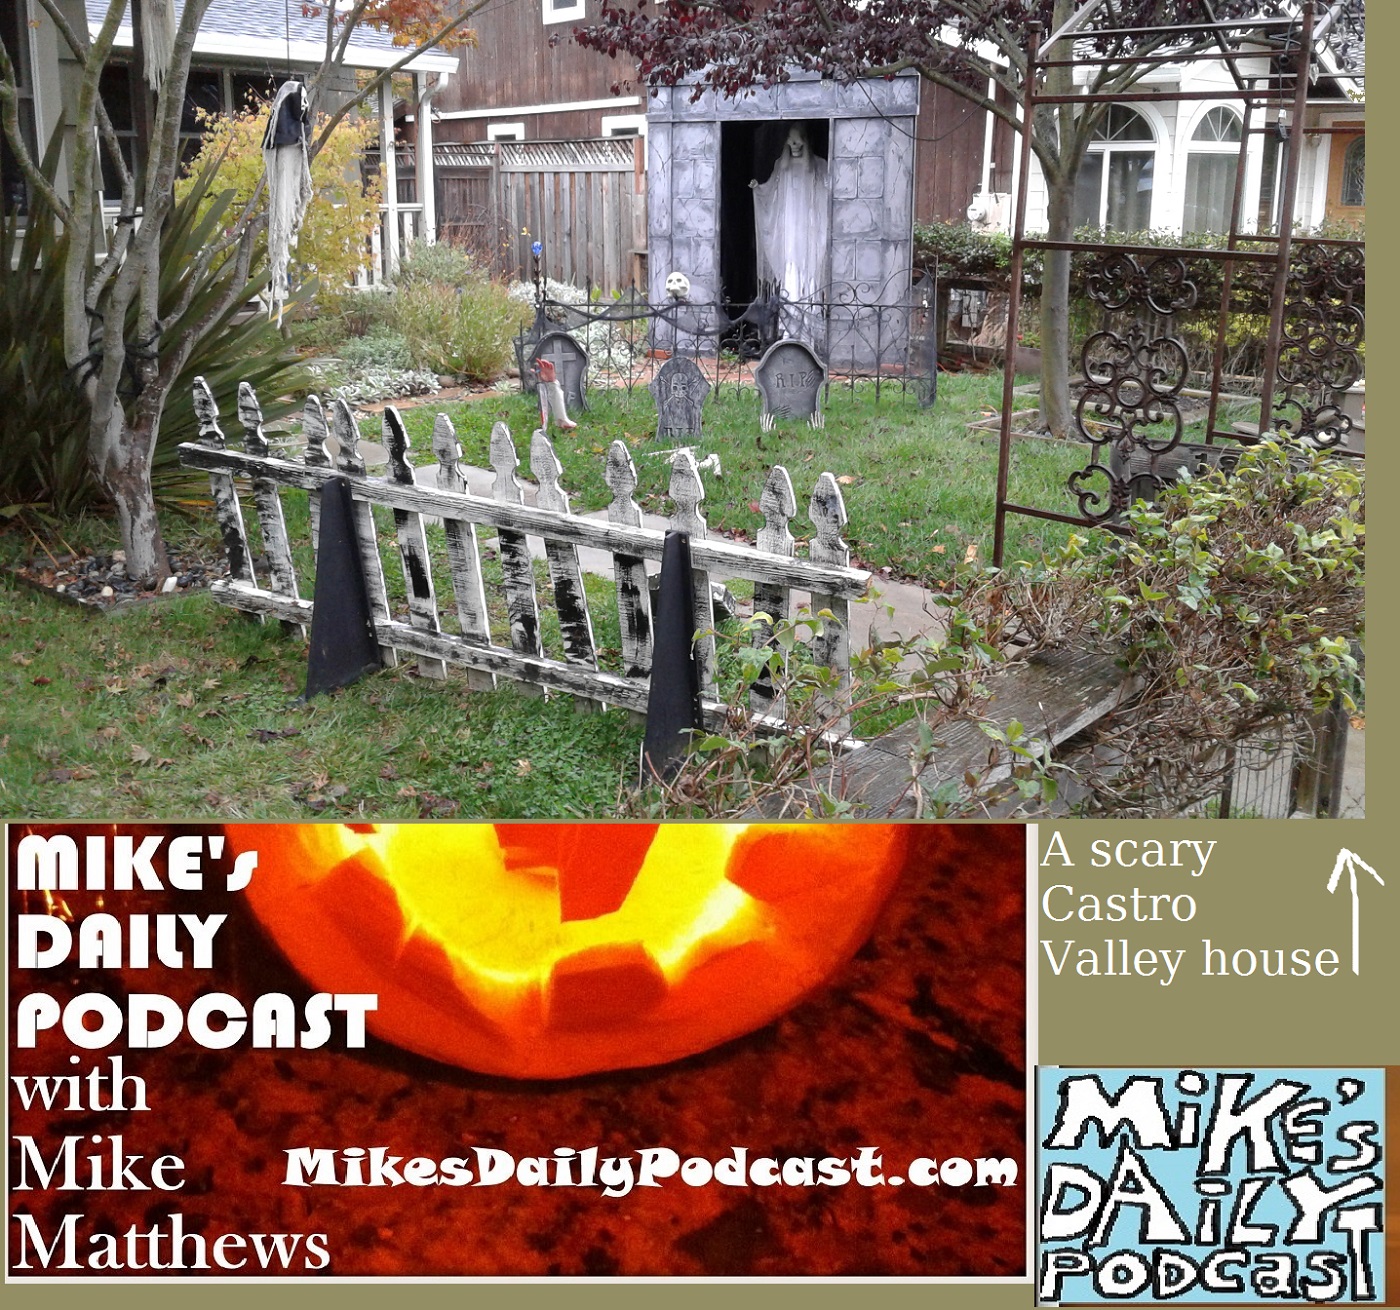 mikes-daily-podcast-1207-castro-valley-halloween-house